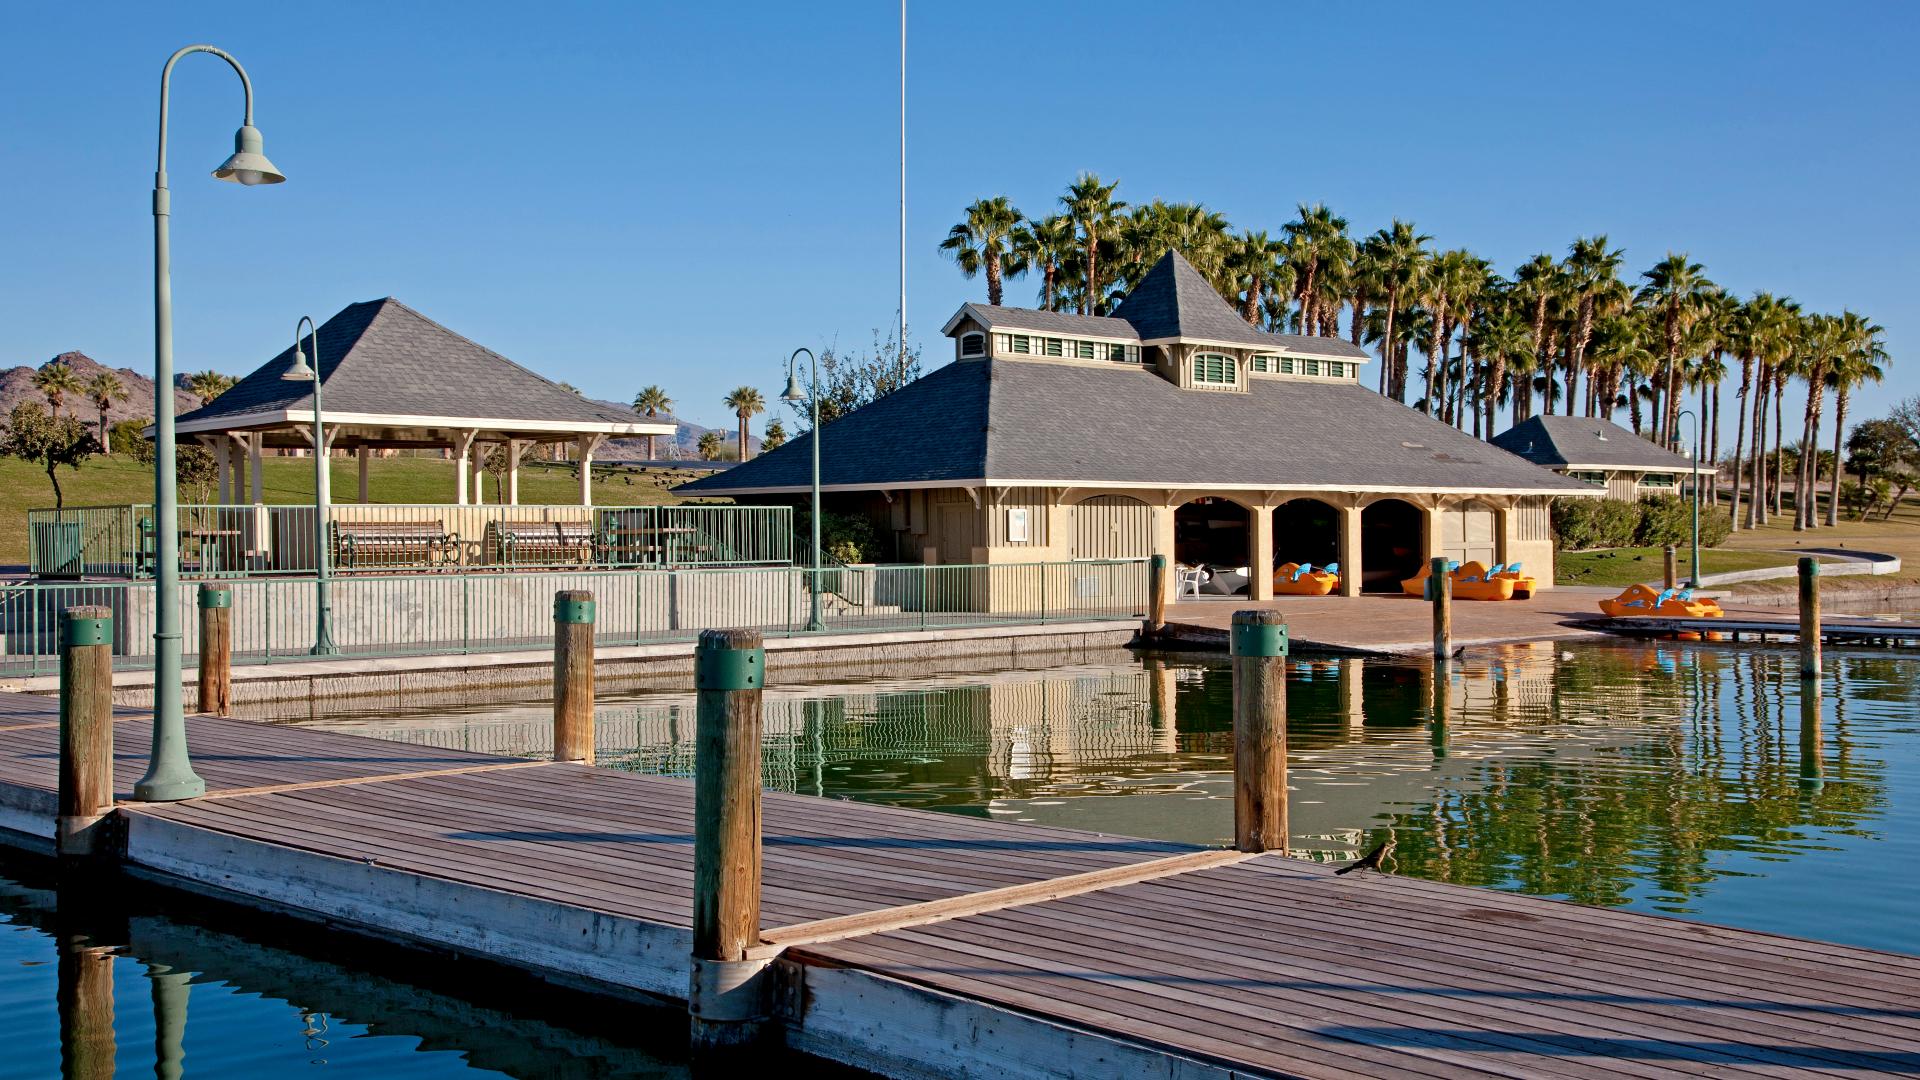 Enjoy outdoor recreation with 72+ acres of lakes and the Estrella Yacht Club